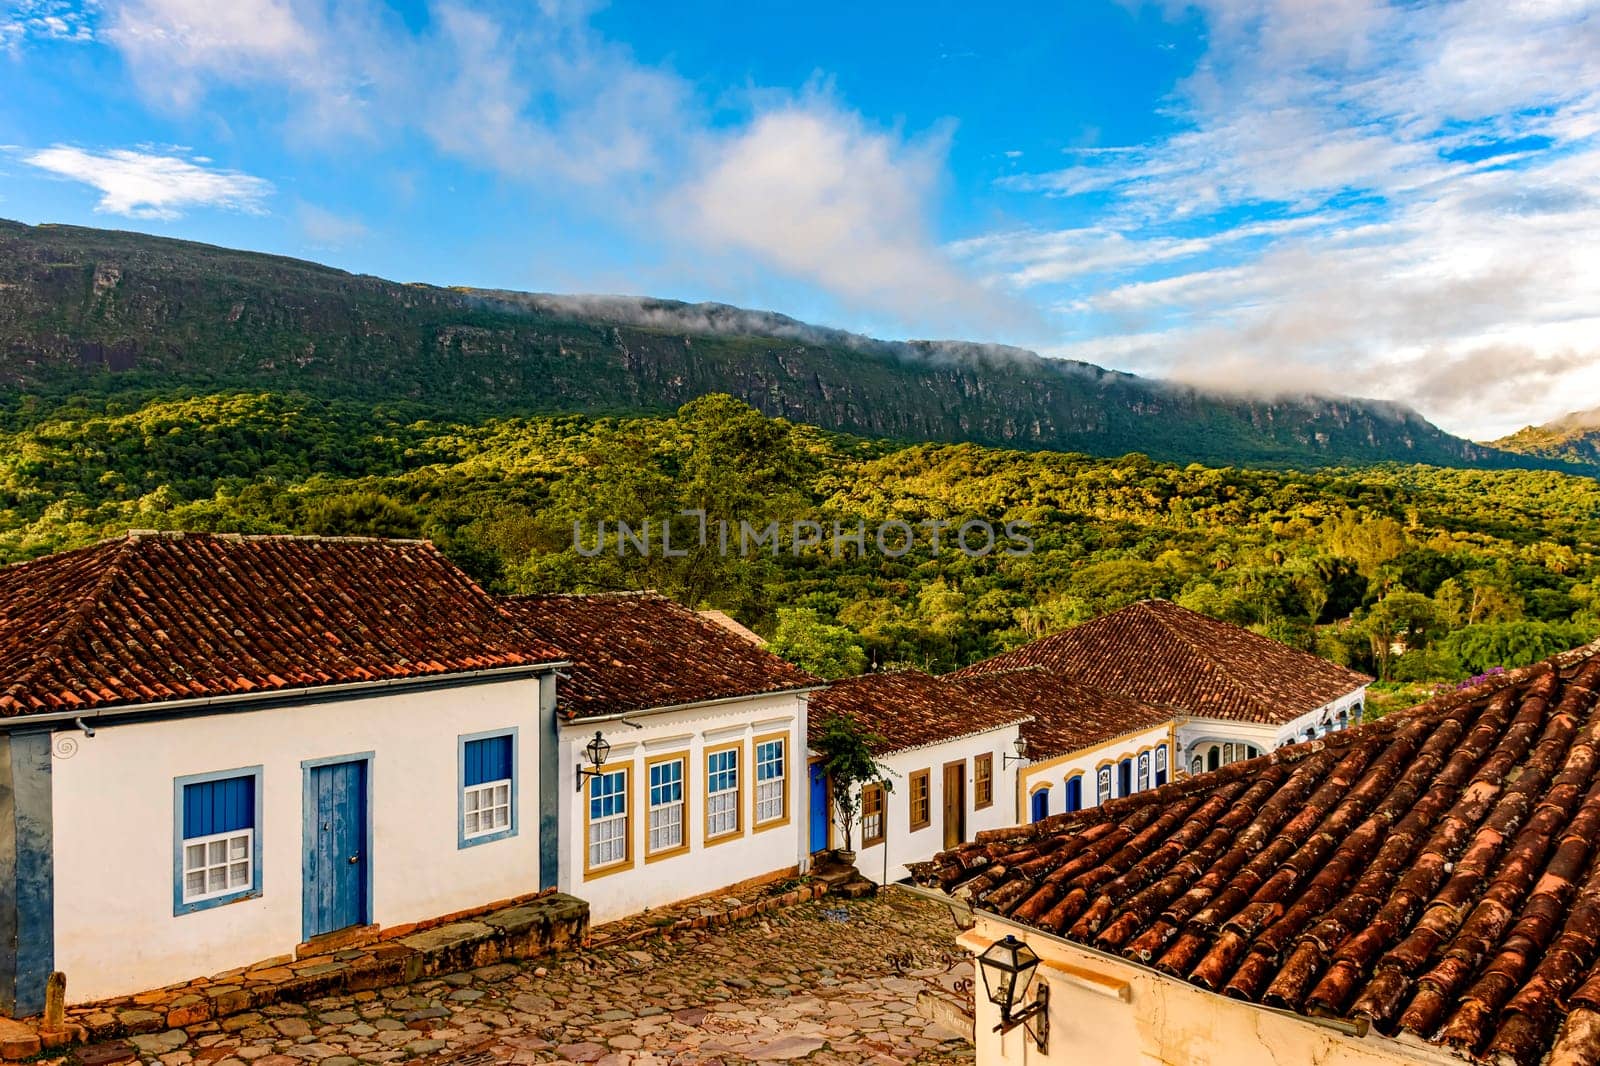 View of the old historic city of Tiradentes by Fred_Pinheiro